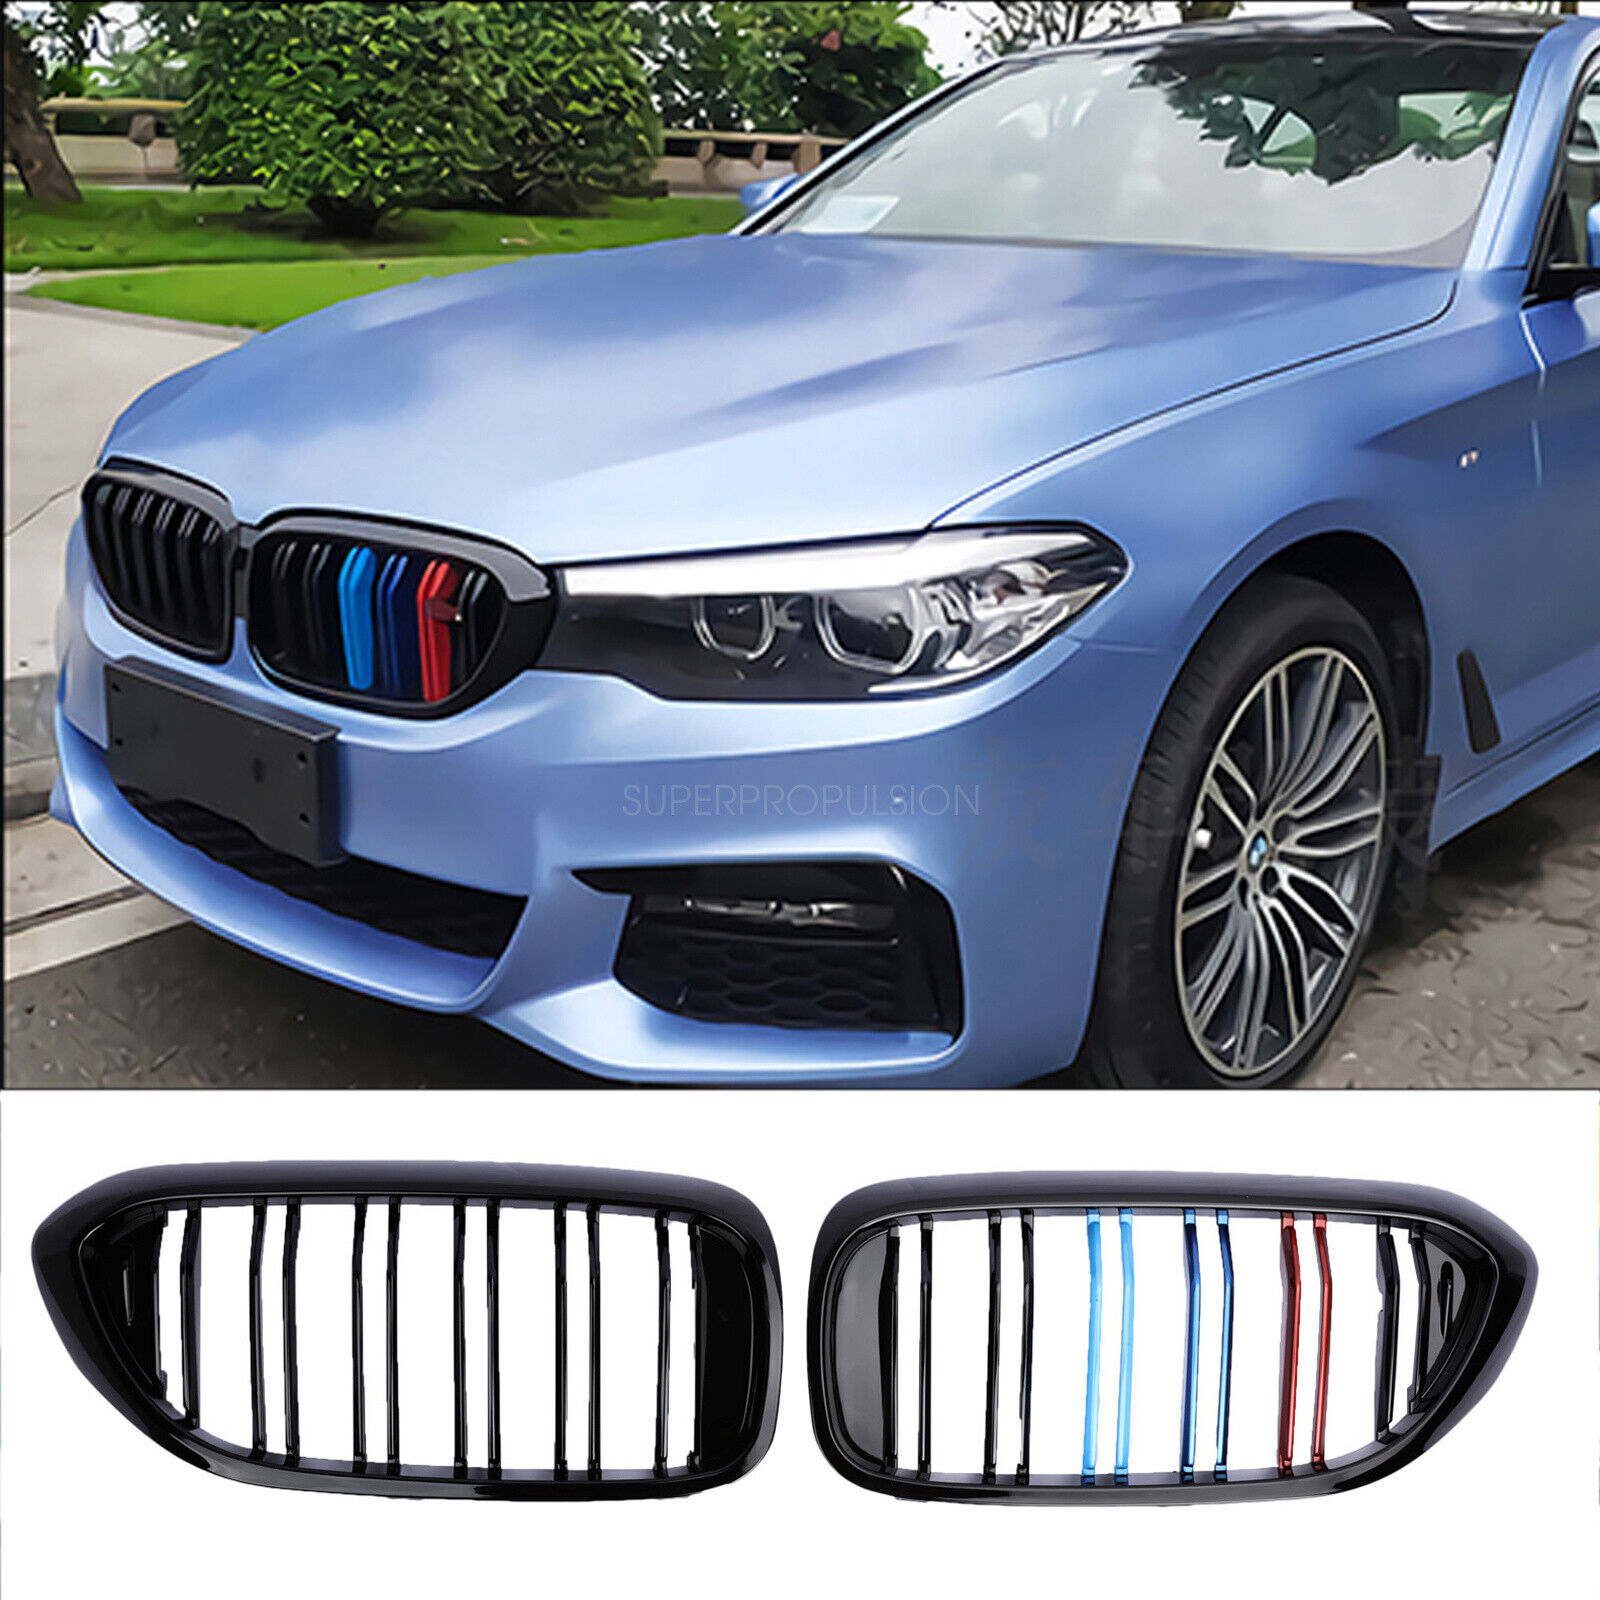 M-Colour For BMW G30 G31 5-Series 530i 540i 2018 Front Kidney Grille